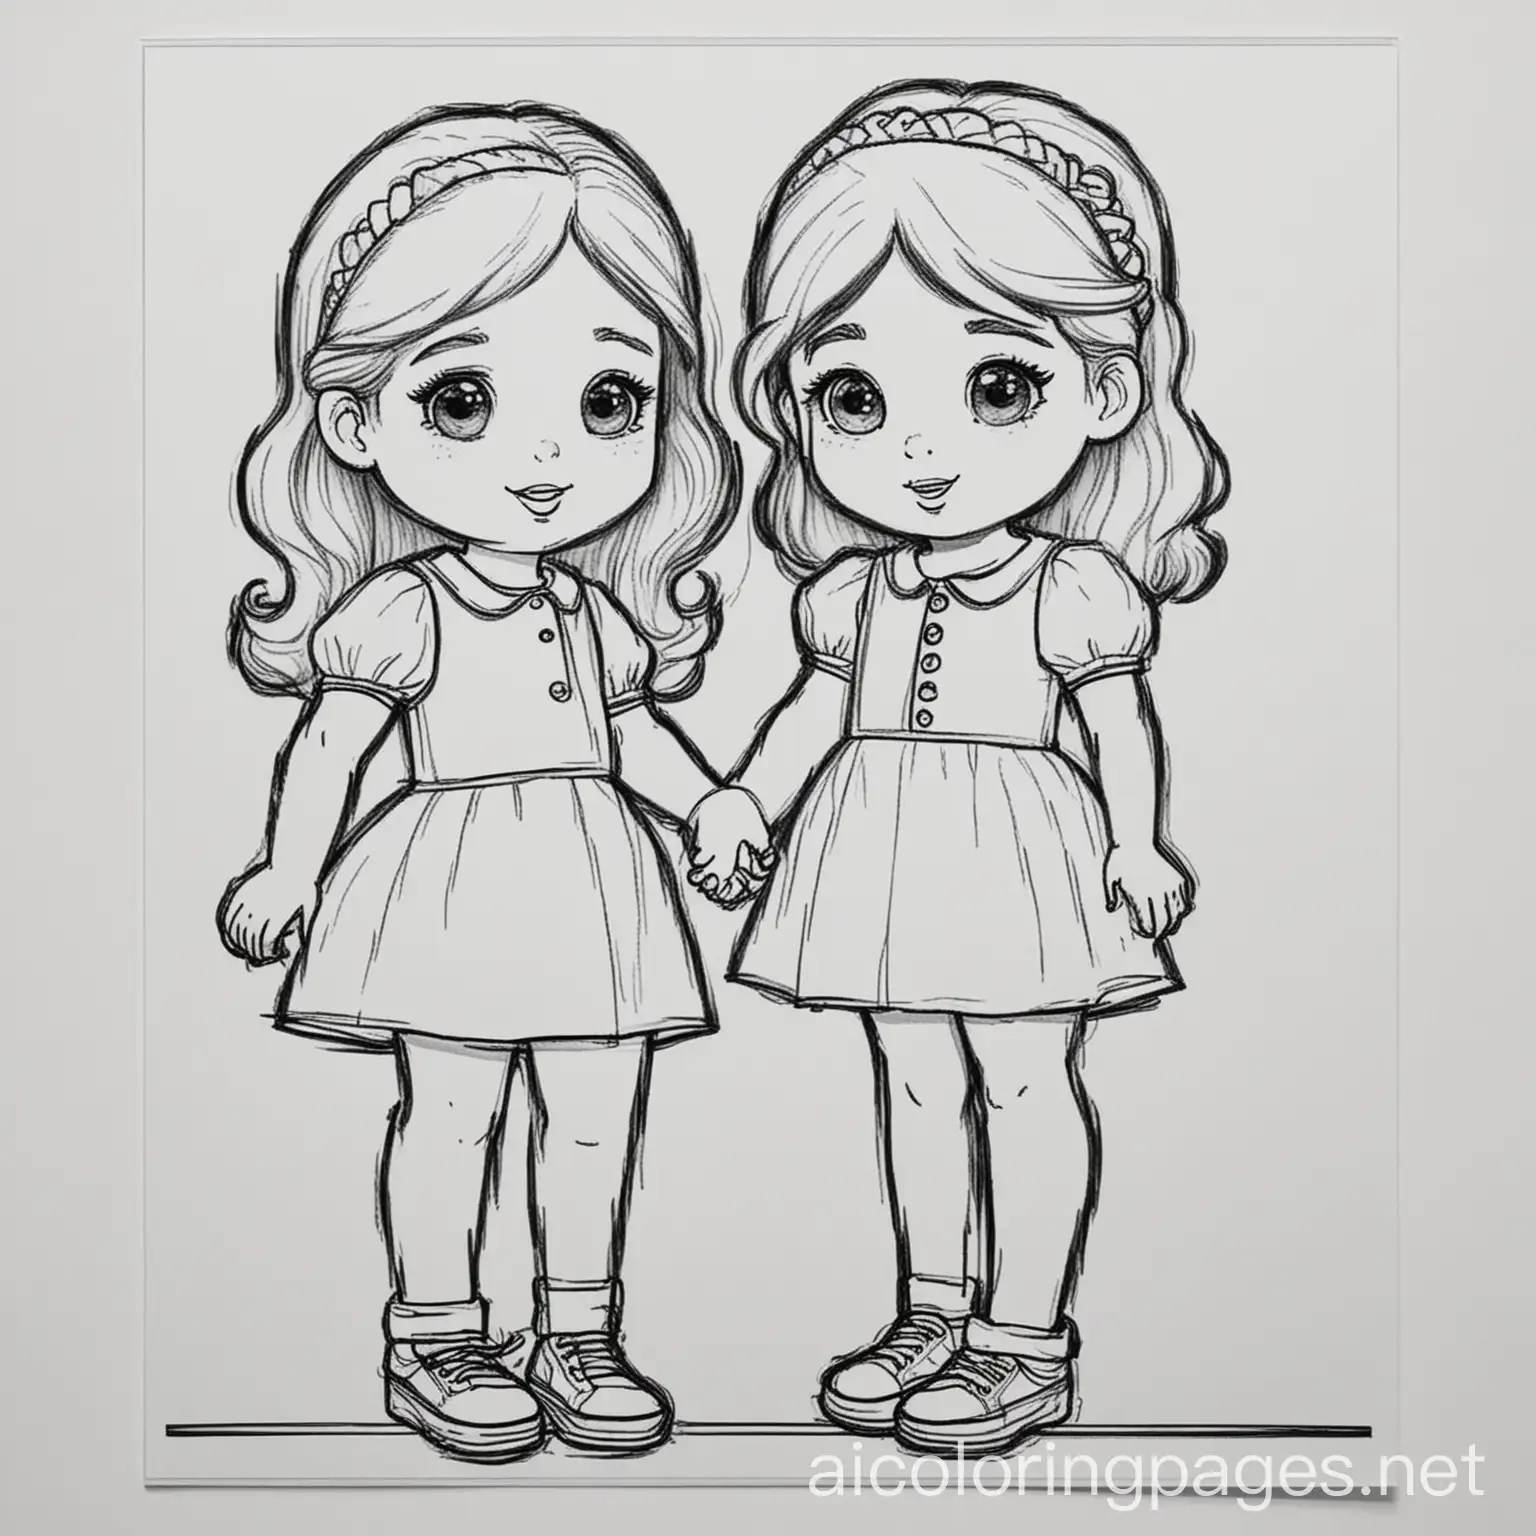 two girls meeting for the first time
, Coloring Page, black and white, line art, white background, Simplicity, Ample White Space. The background of the coloring page is plain white to make it easy for young children to color within the lines. The outlines of all the subjects are easy to distinguish, making it simple for kids to color without too much difficulty